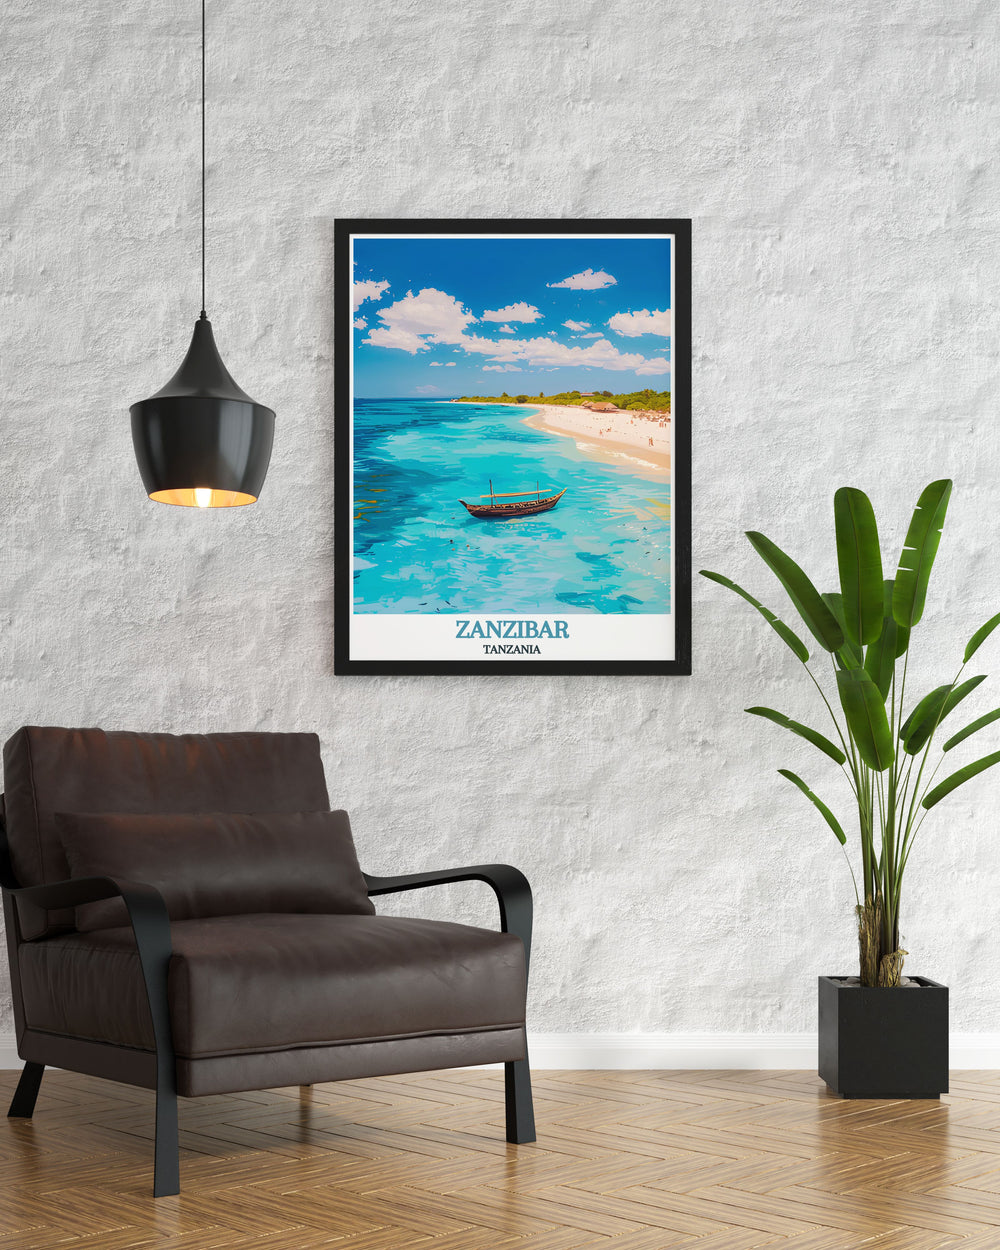 Beautiful Nungwi Beach poster featuring a serene and picturesque landscape of Zanzibar ideal for adding a touch of paradise to your home decor and creating a tranquil atmosphere with high quality prints that everyone will admire.